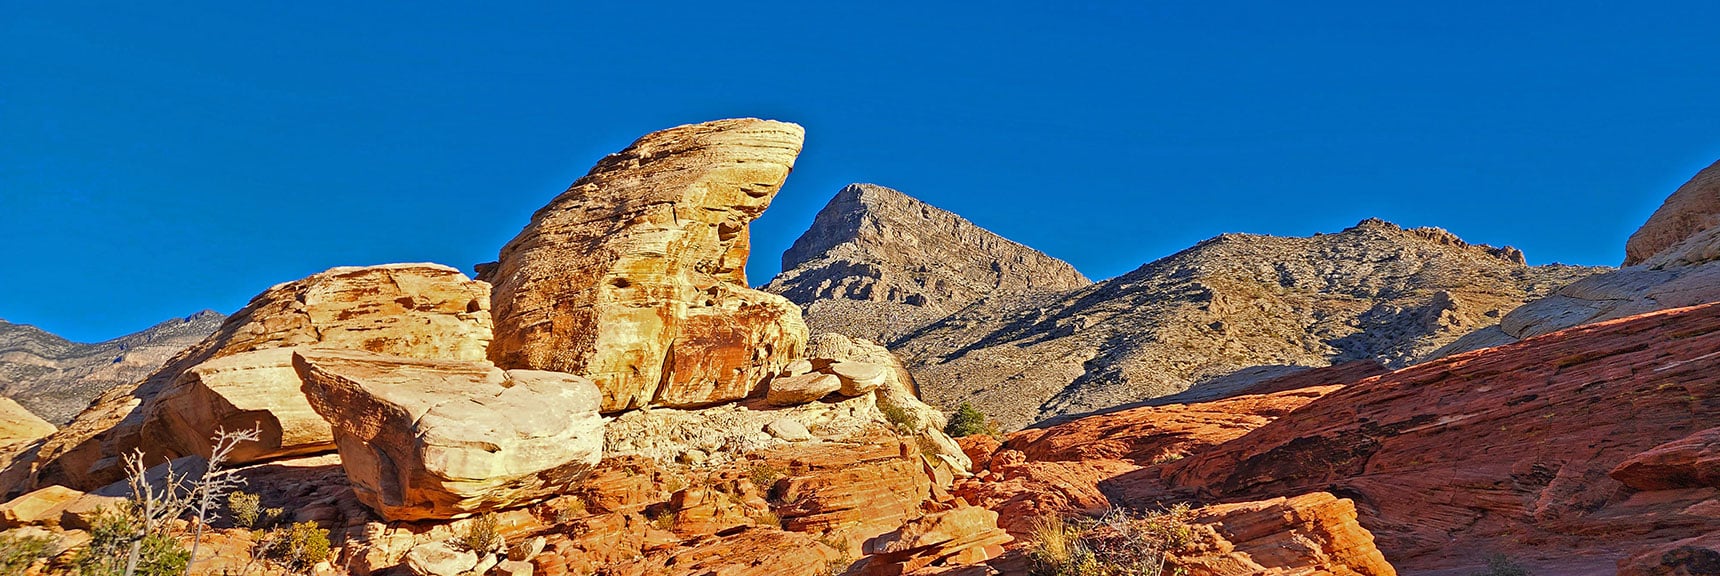 Turtlehead Peak Framed by One of the Sandstone Formations on Calico Tanks Trail | Calico Tanks | Red Rock Canyon National Conservation Area, Nevada